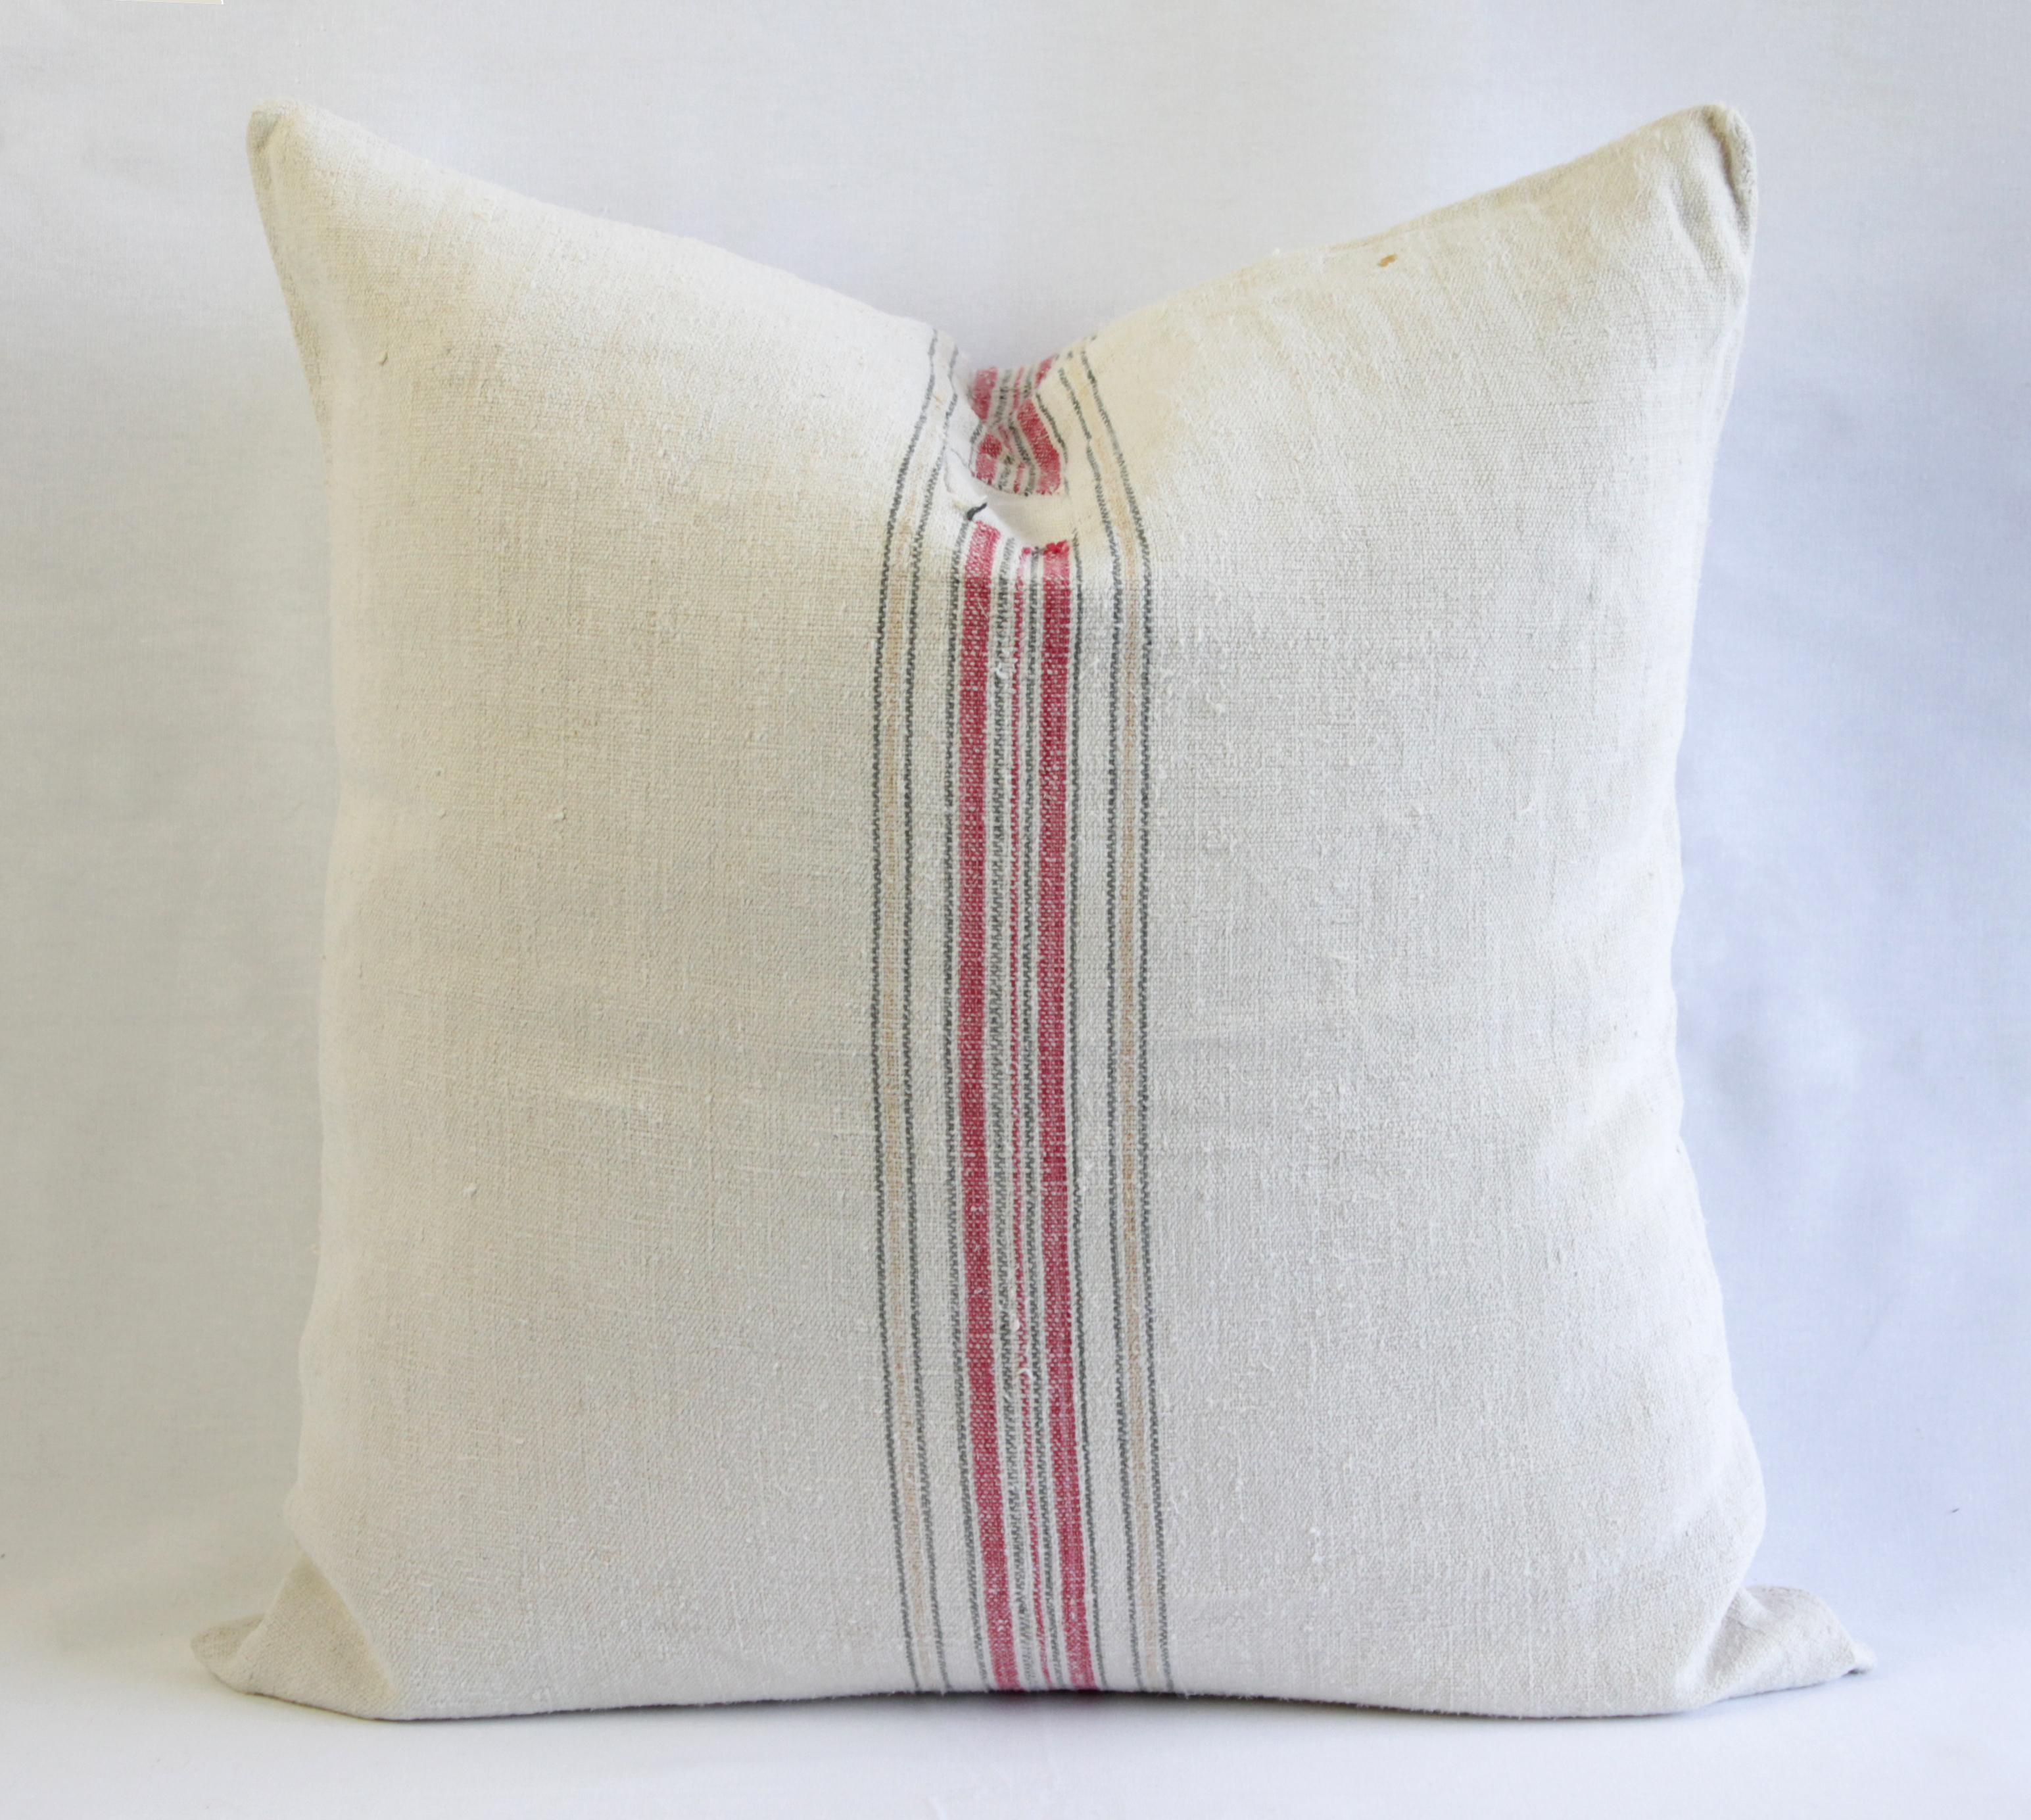 Beautiful pillow made from antique farmers grain sack, circa 1890-1920. These are a light oatmeal color with a red and tan stripes in the centre. Each pillow is finished with a zipper closure. Front and back are in the same grain sack, and both are